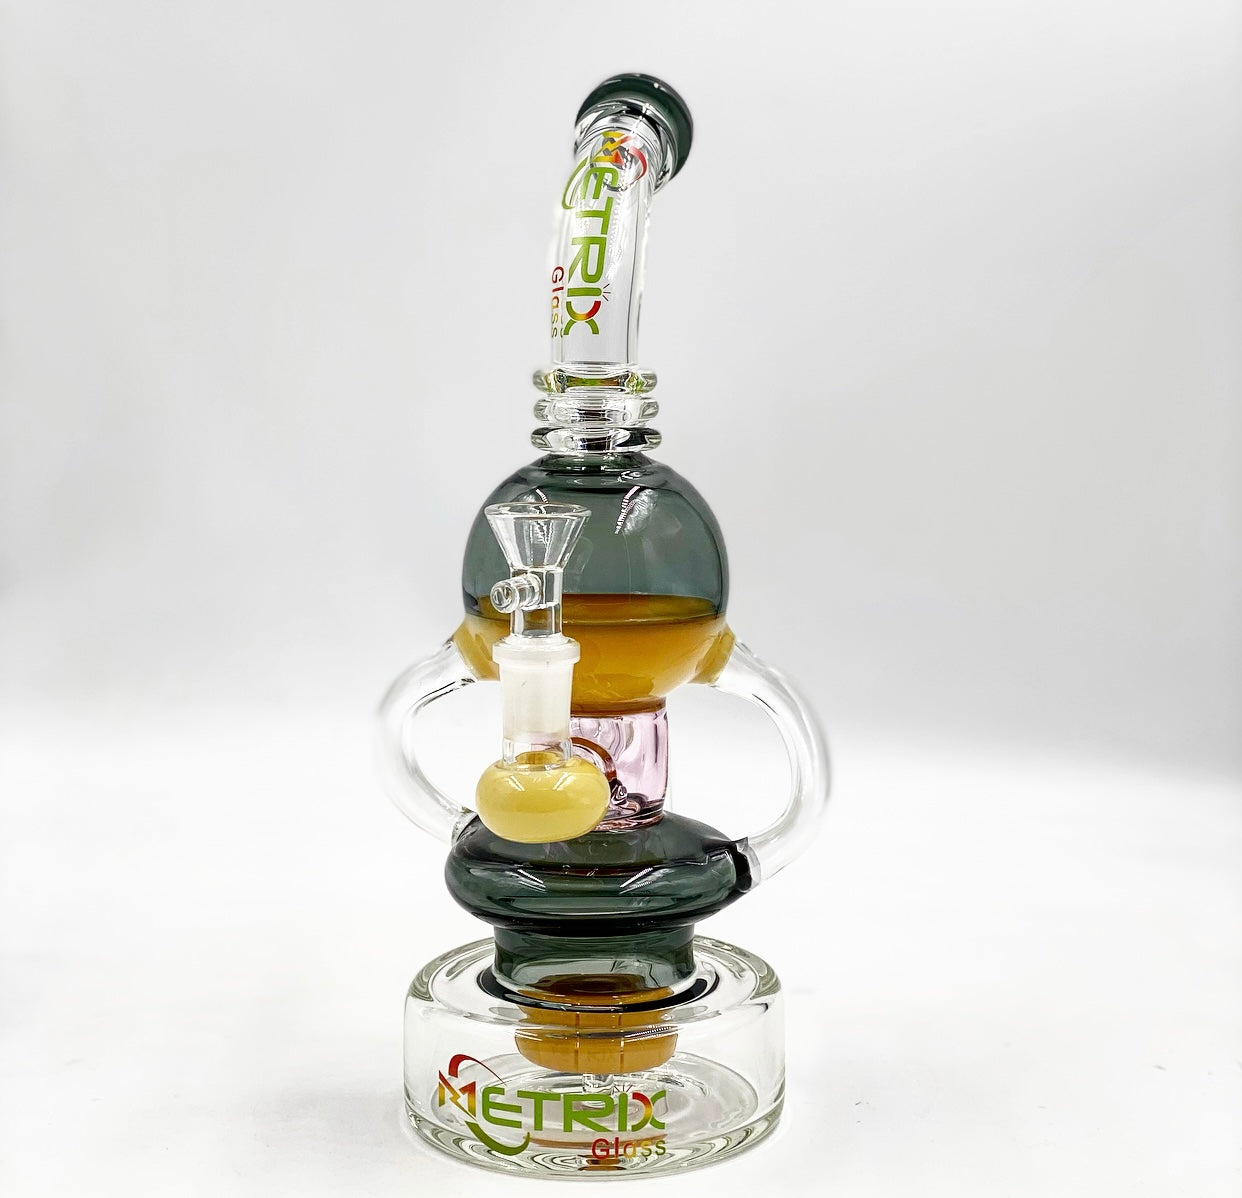 WP KD 1/ METRIX 14 INCH DOUBLE BOWL PERC WITH RECYCLE